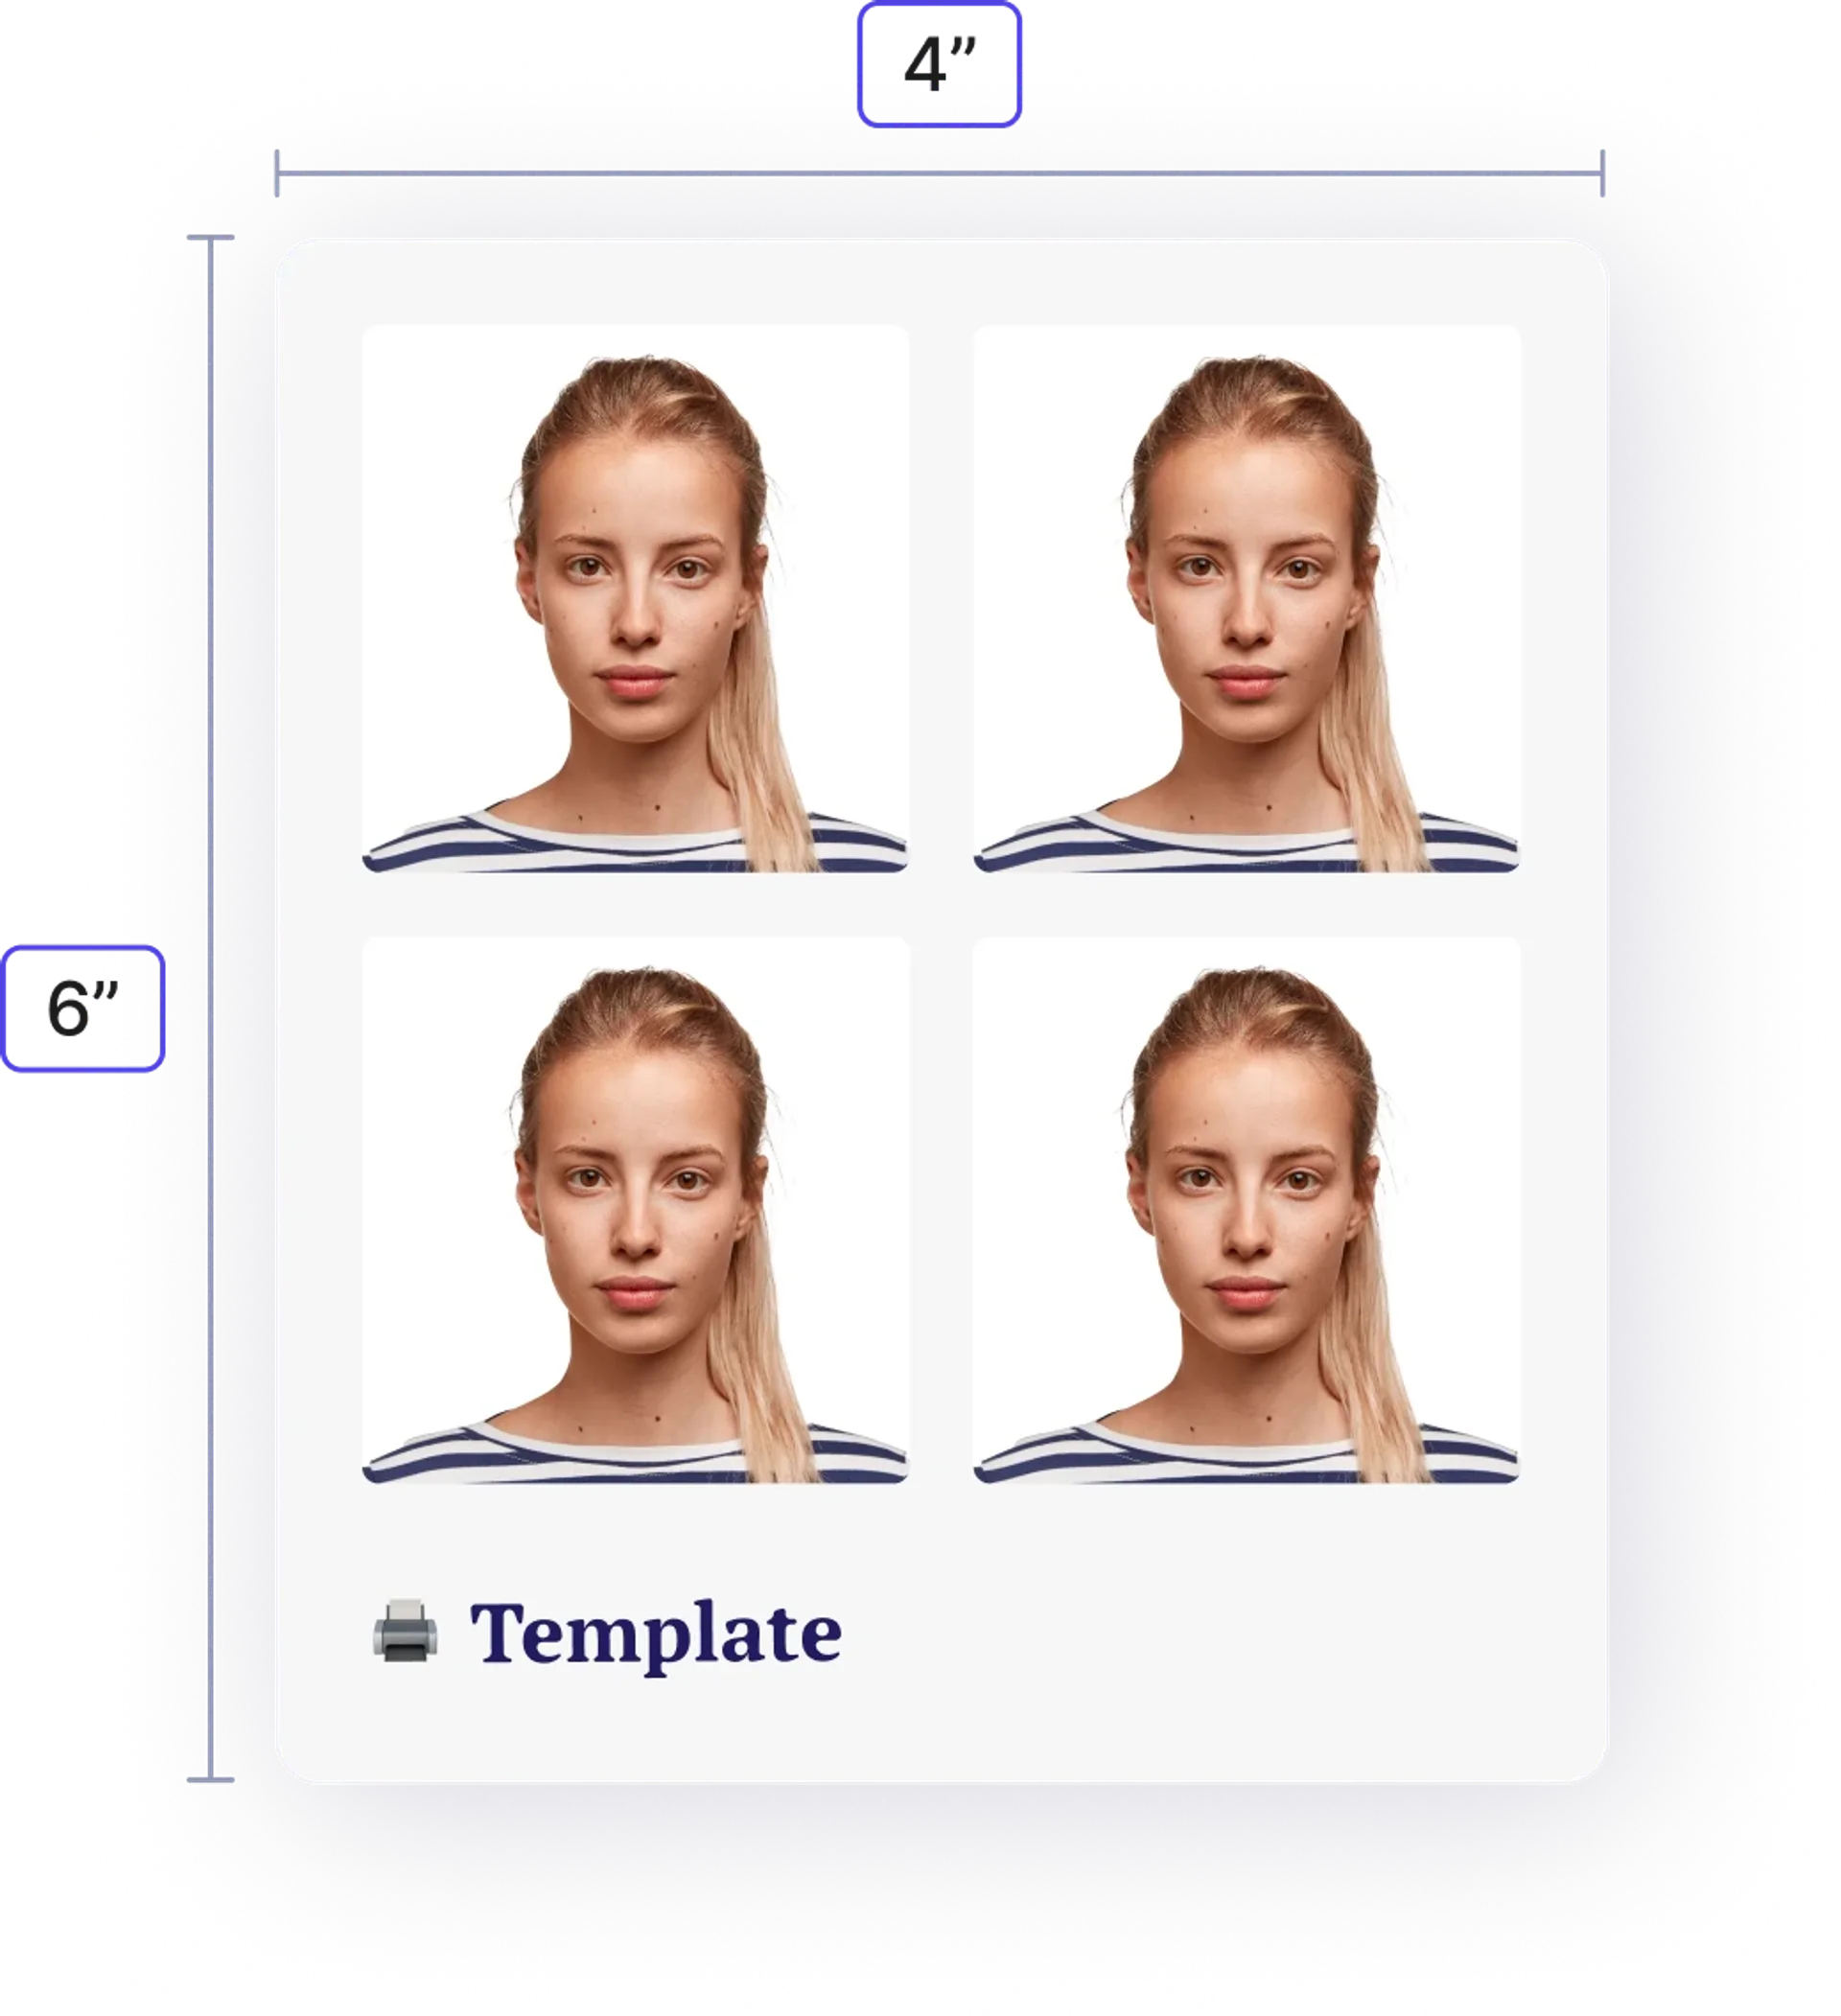 Get your passport photos printed affordably with a perfect 4x6 passport photo template from Passport Photo Online!